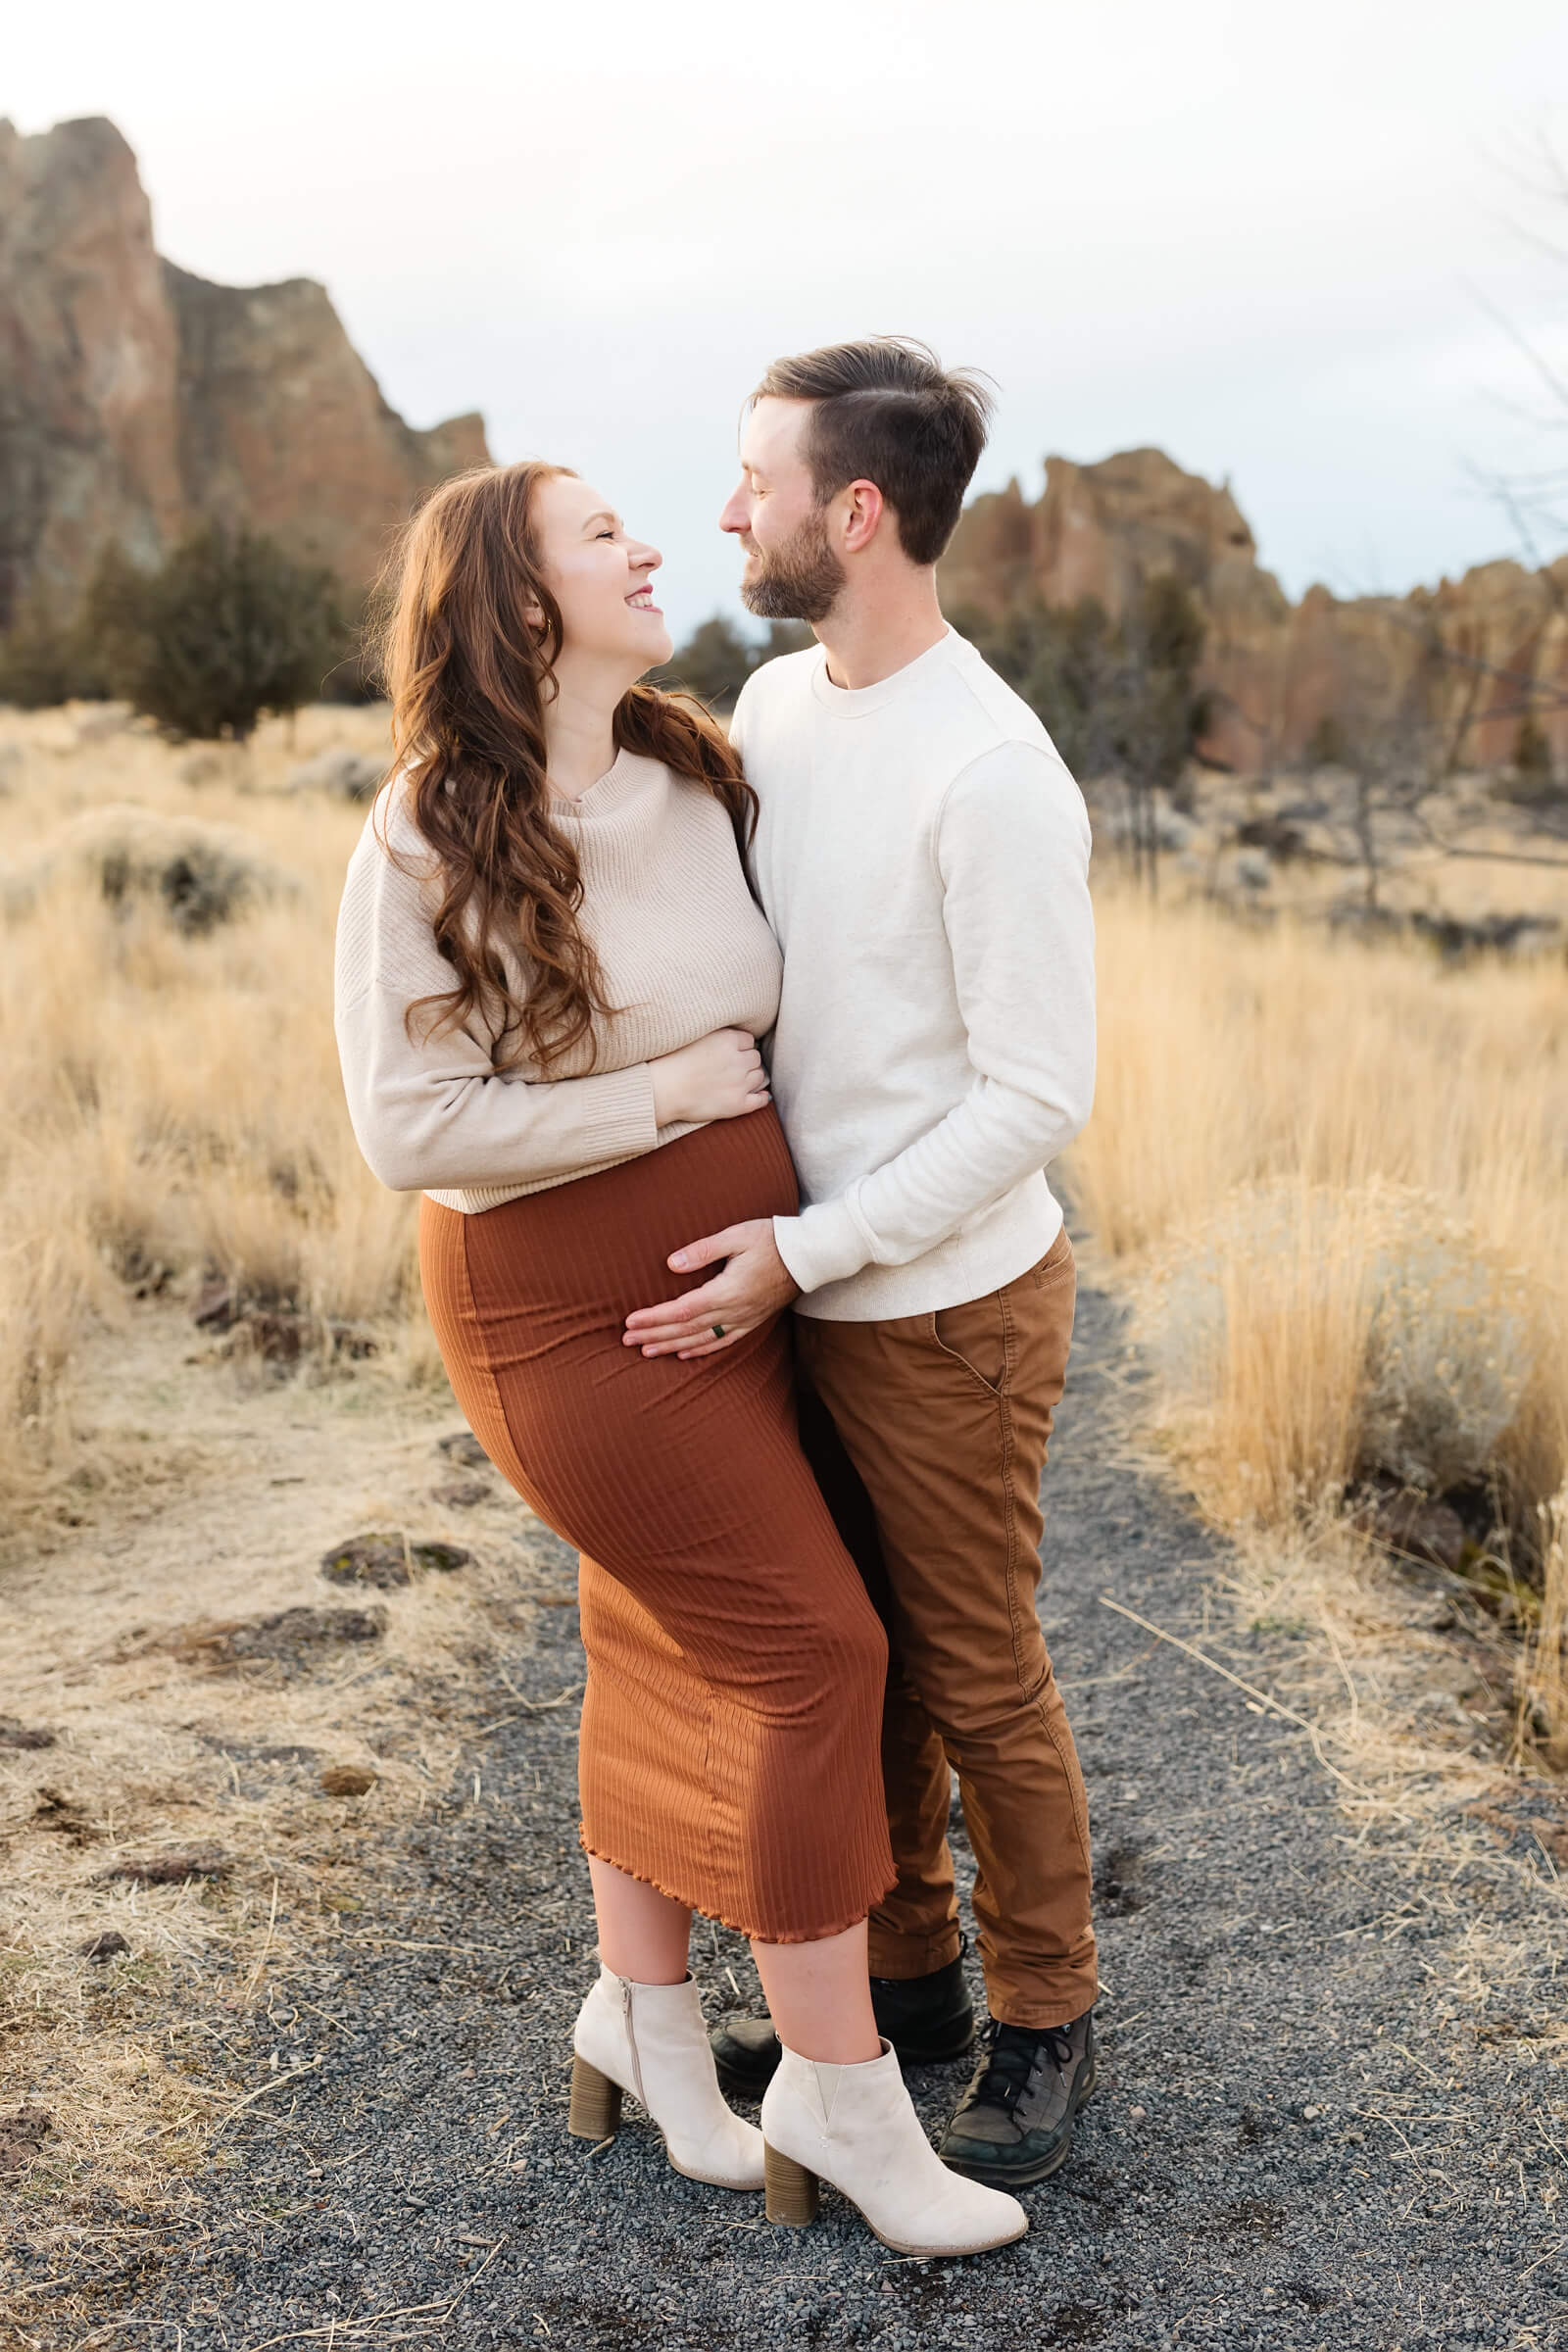 expecting mother with red hair and wearing terracotta skirt smiling at husband touching her pregnant belly at smith rock